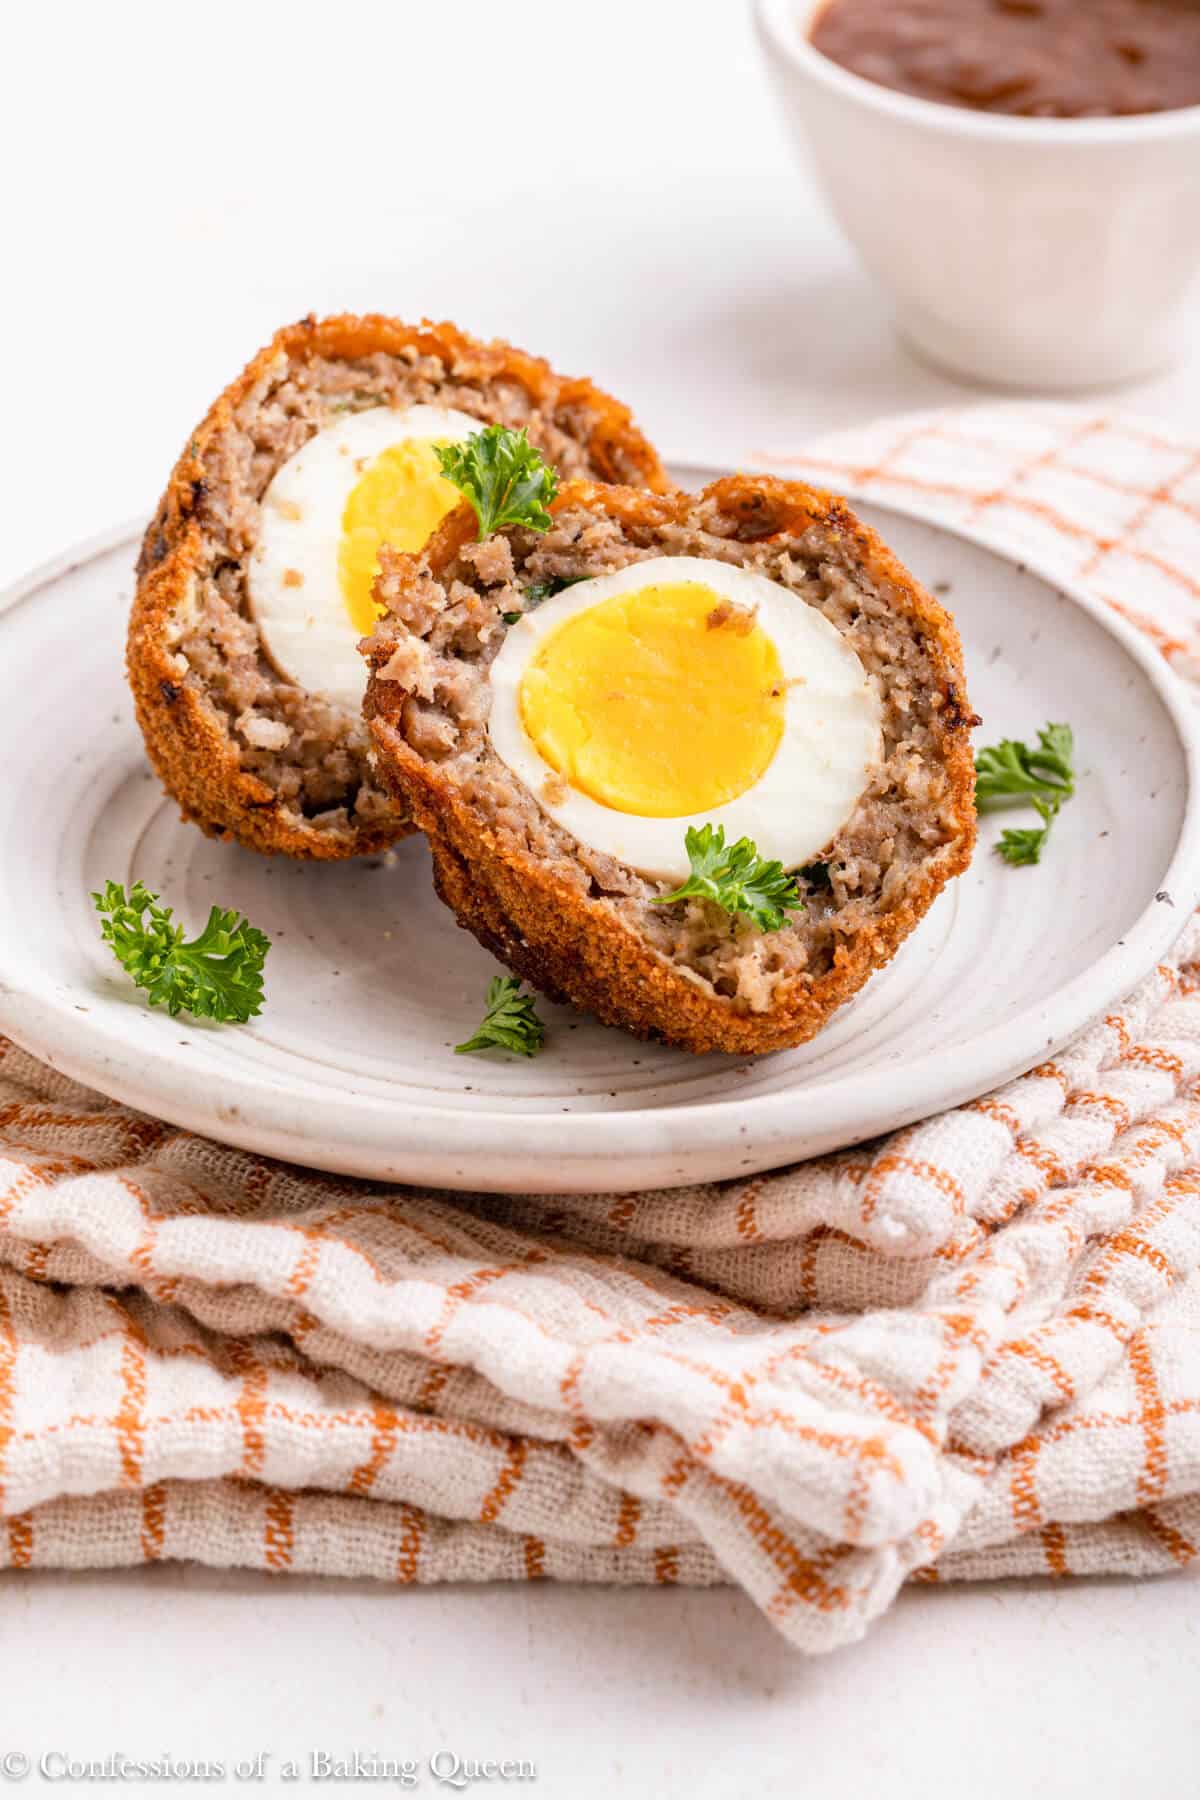 scotch egg cut into two pieces on a light white plate on top of a white and orange linen on a light surface